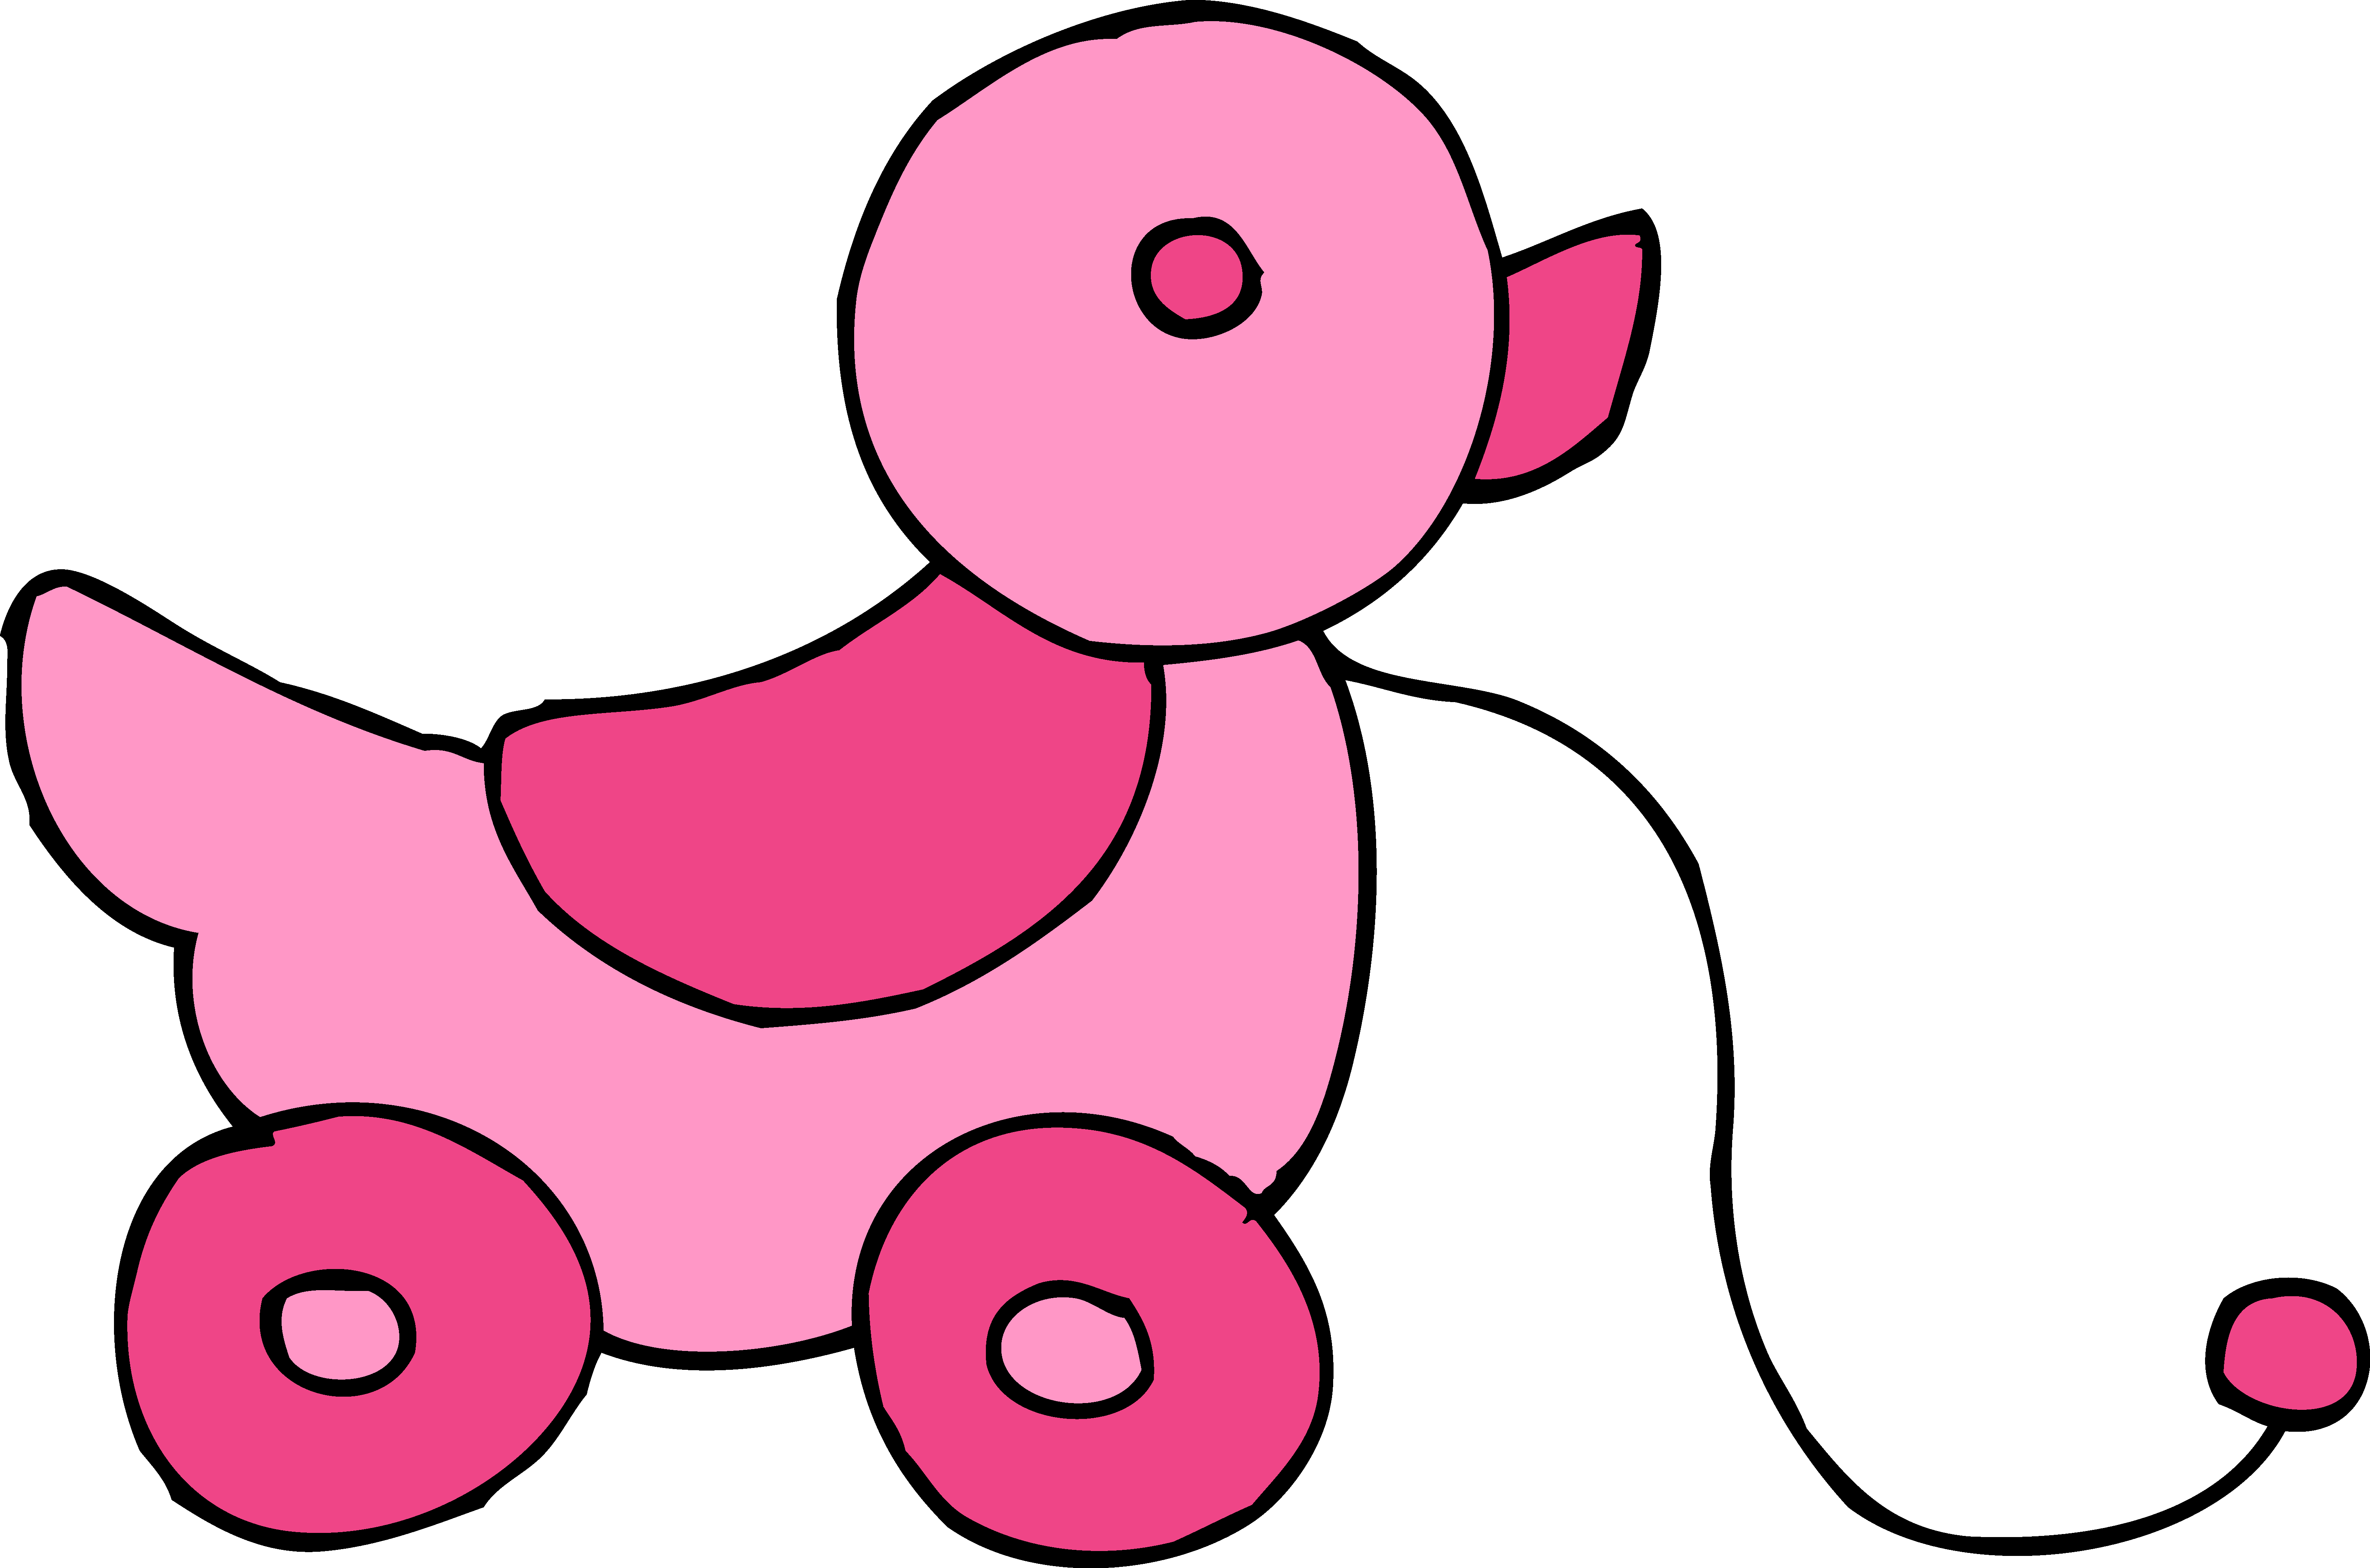 Free Baby Toys Clipart, Download Free Clip Art, Free Clip